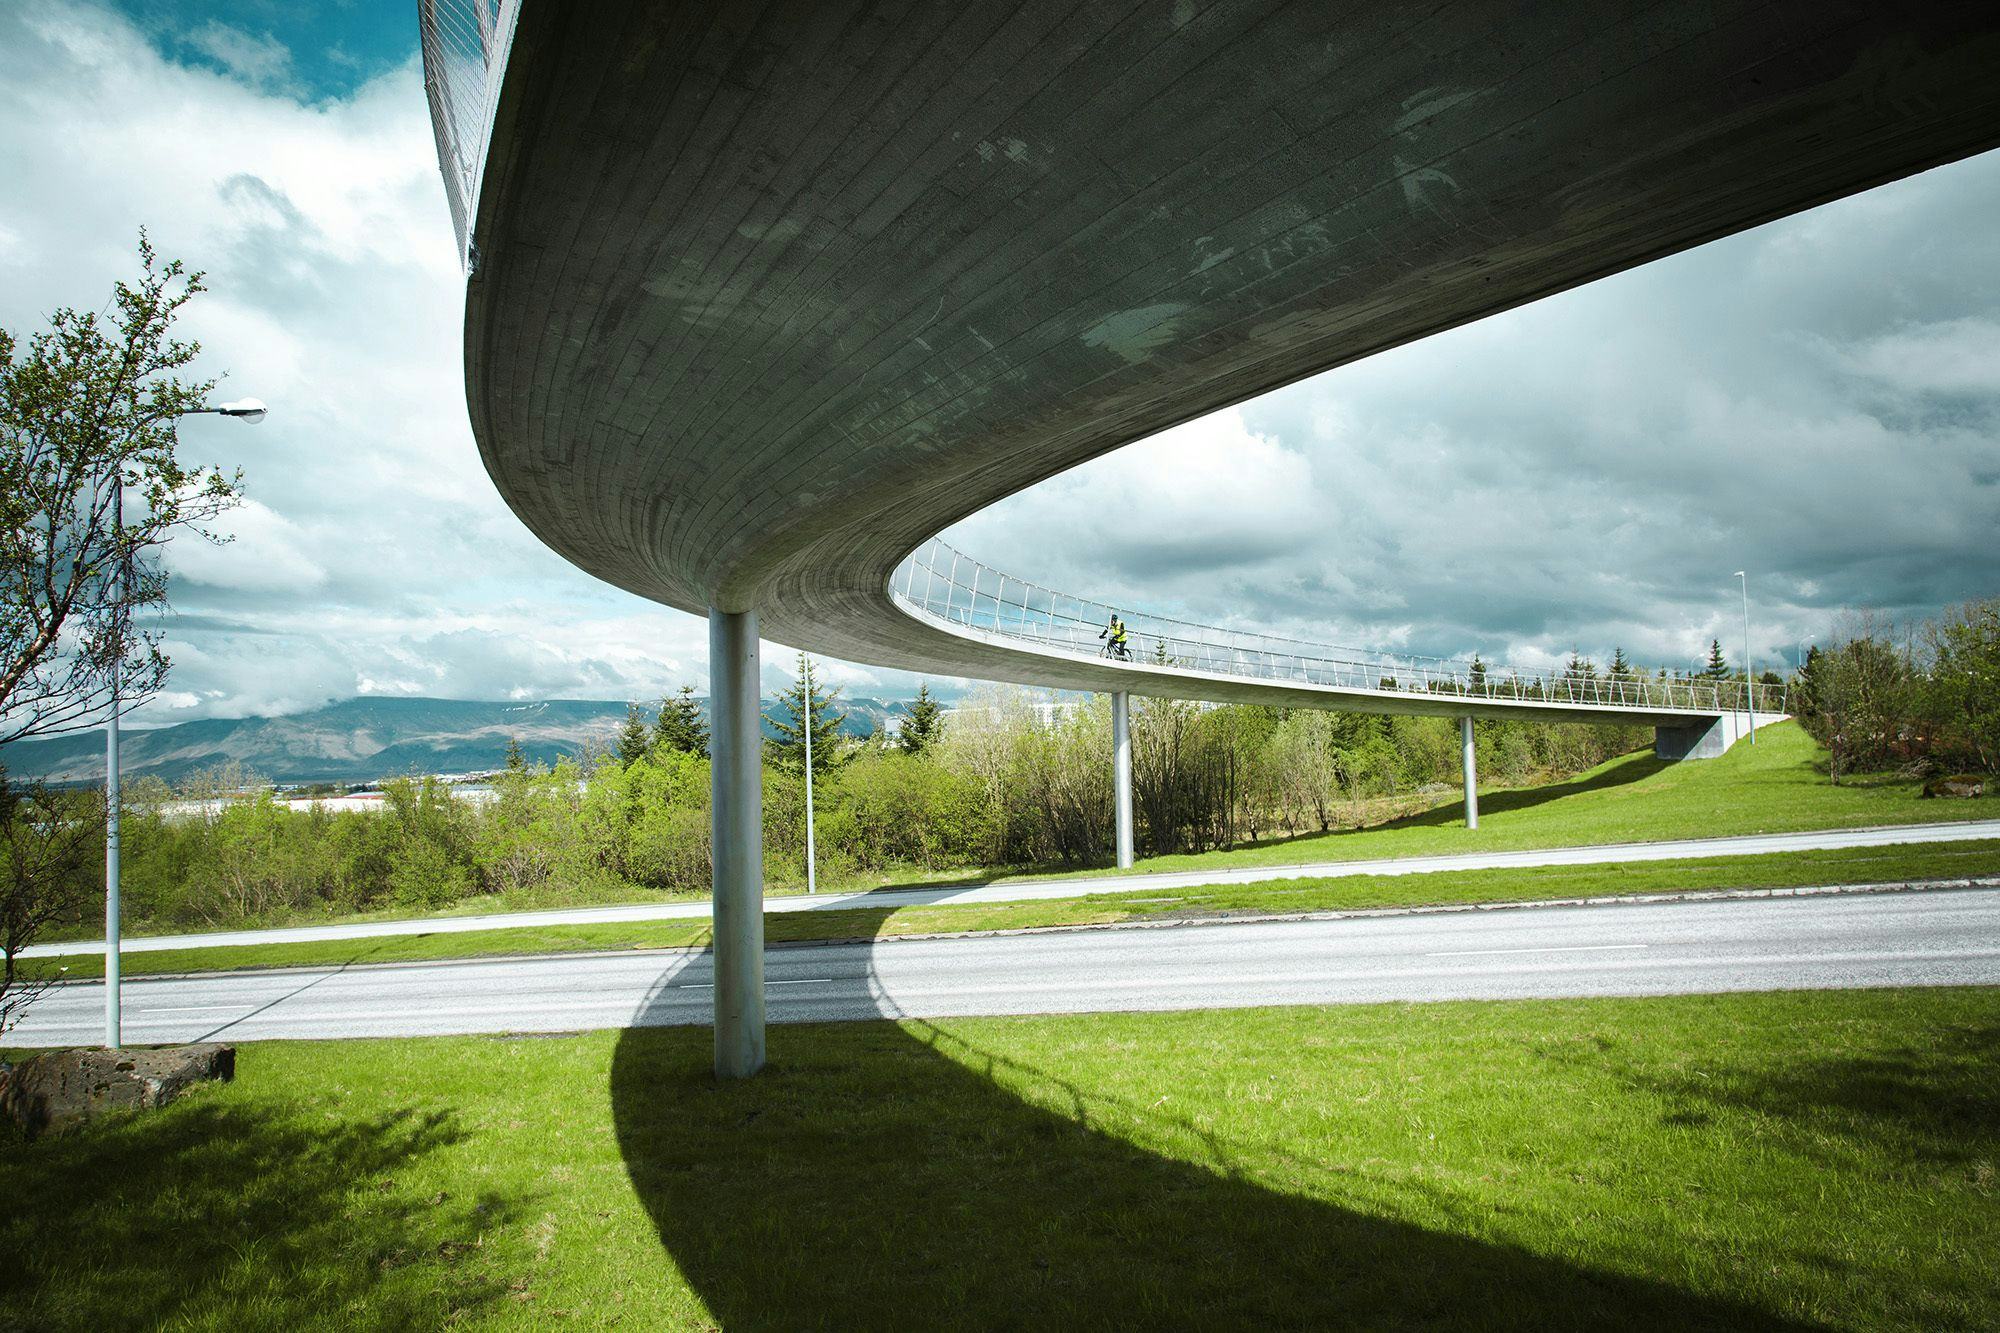 An elegant, curving structure of a pedestrian bridge with a smooth underbelly, under cloudy sky